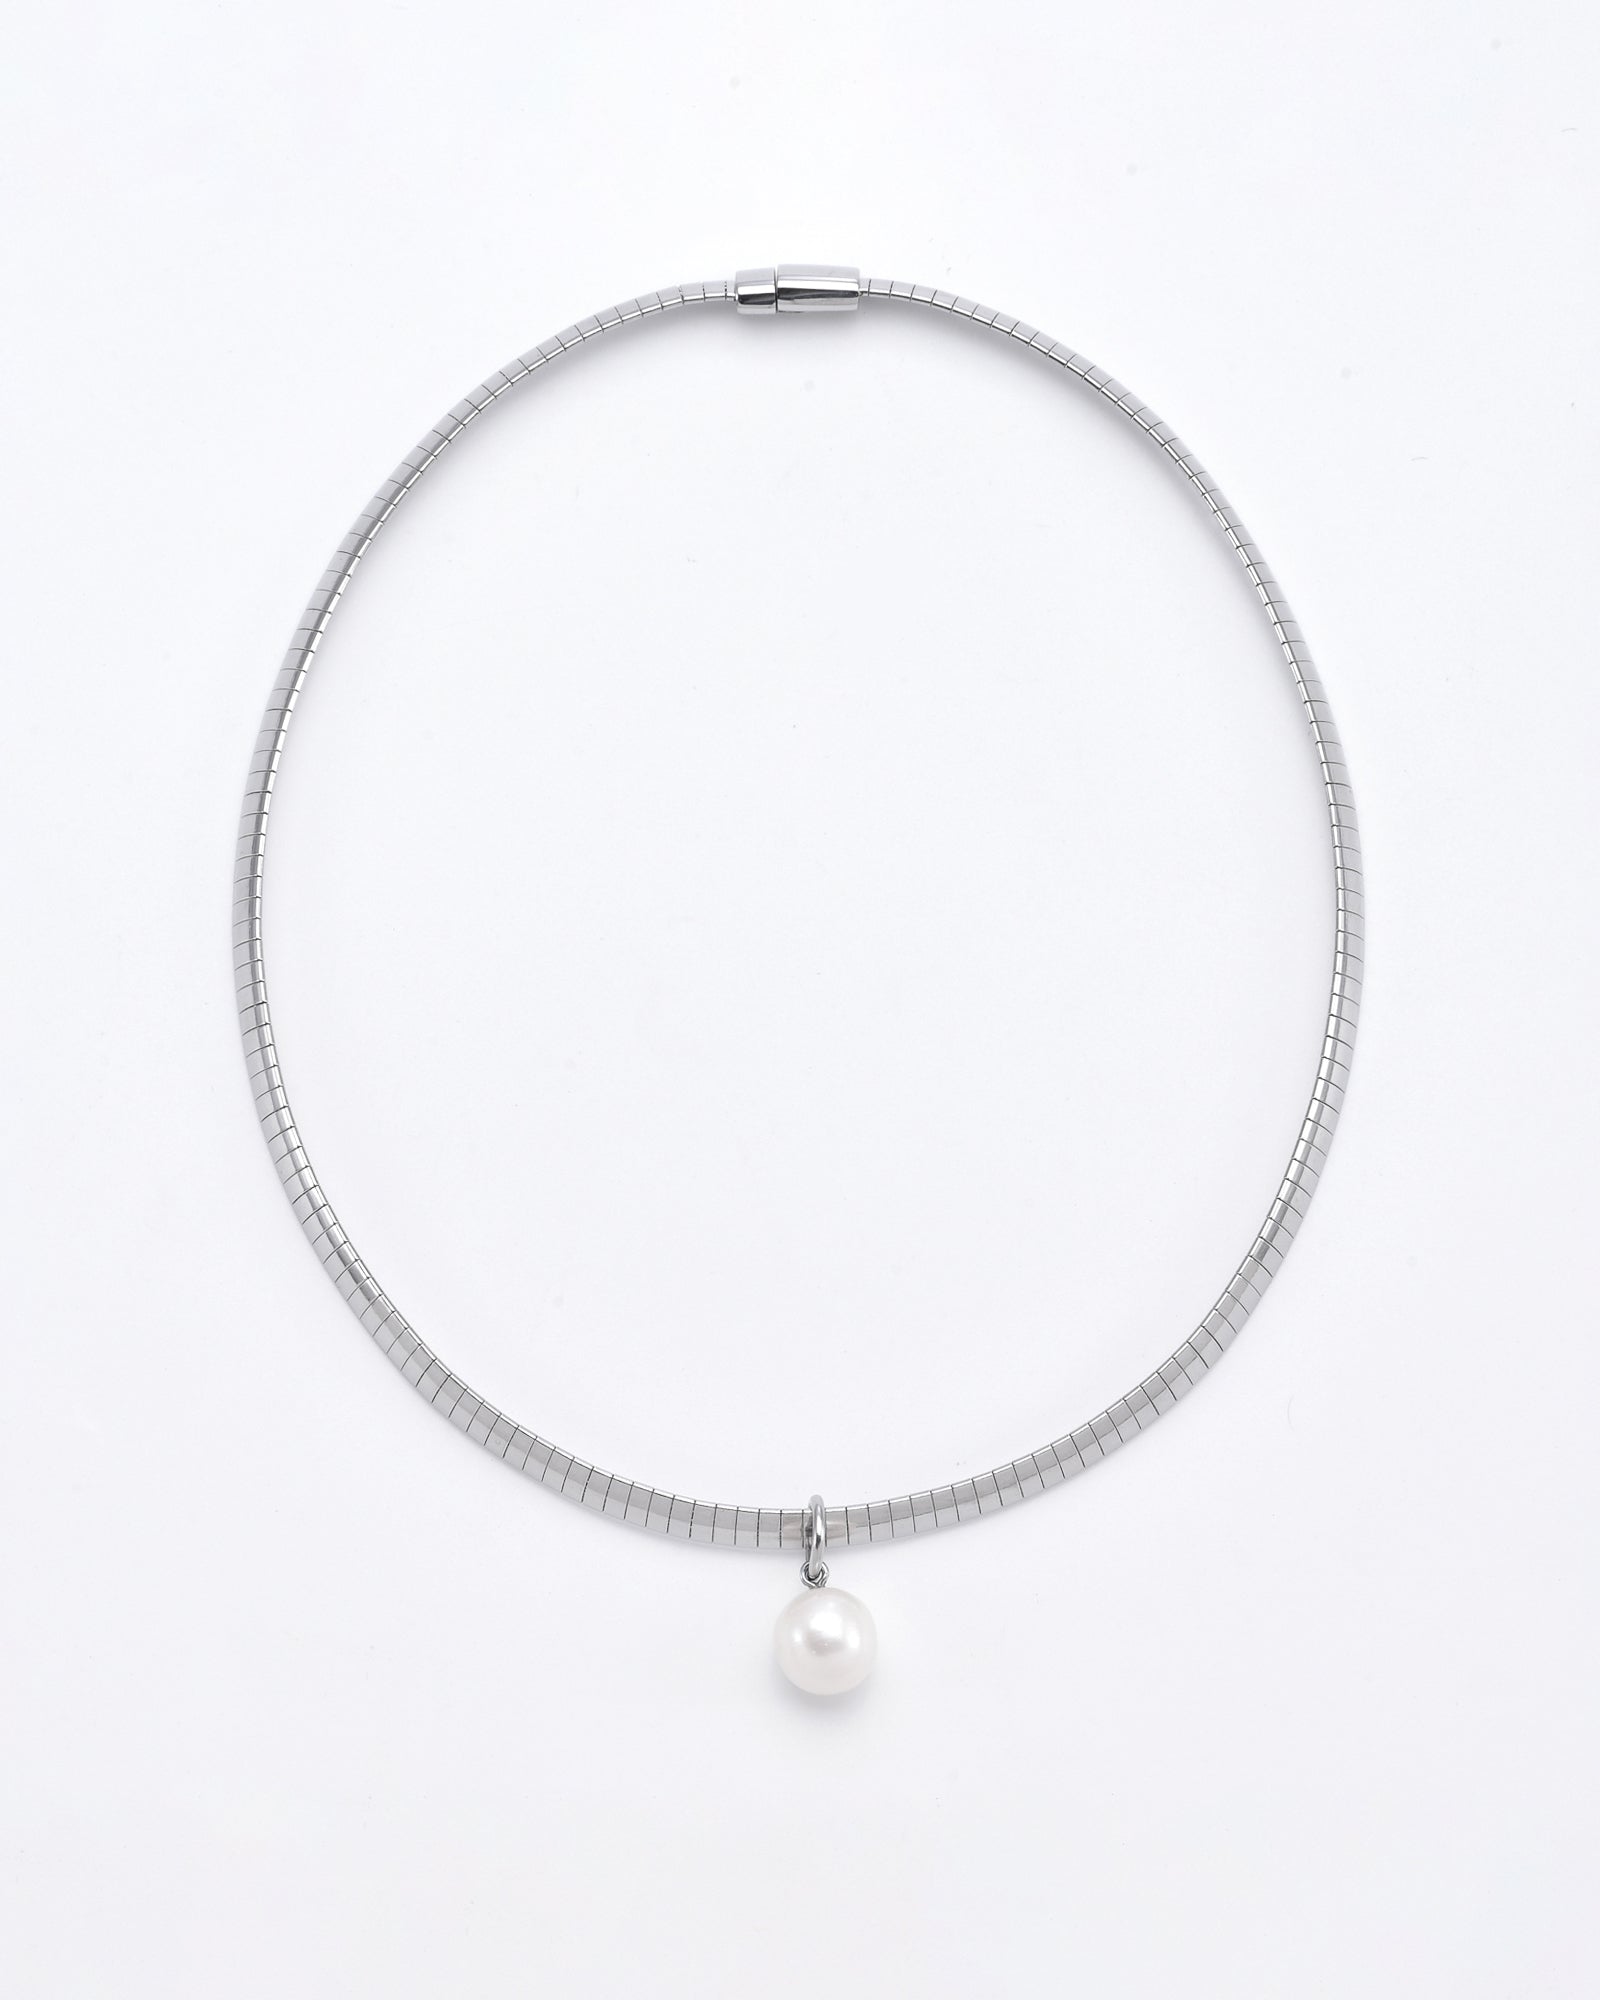 A minimalist For Art's Sake® Orbit Necklace Silver with a single, round freshwater pearl pendant. The necklace is closed with a sleek metal clasp and is displayed against a plain white background.